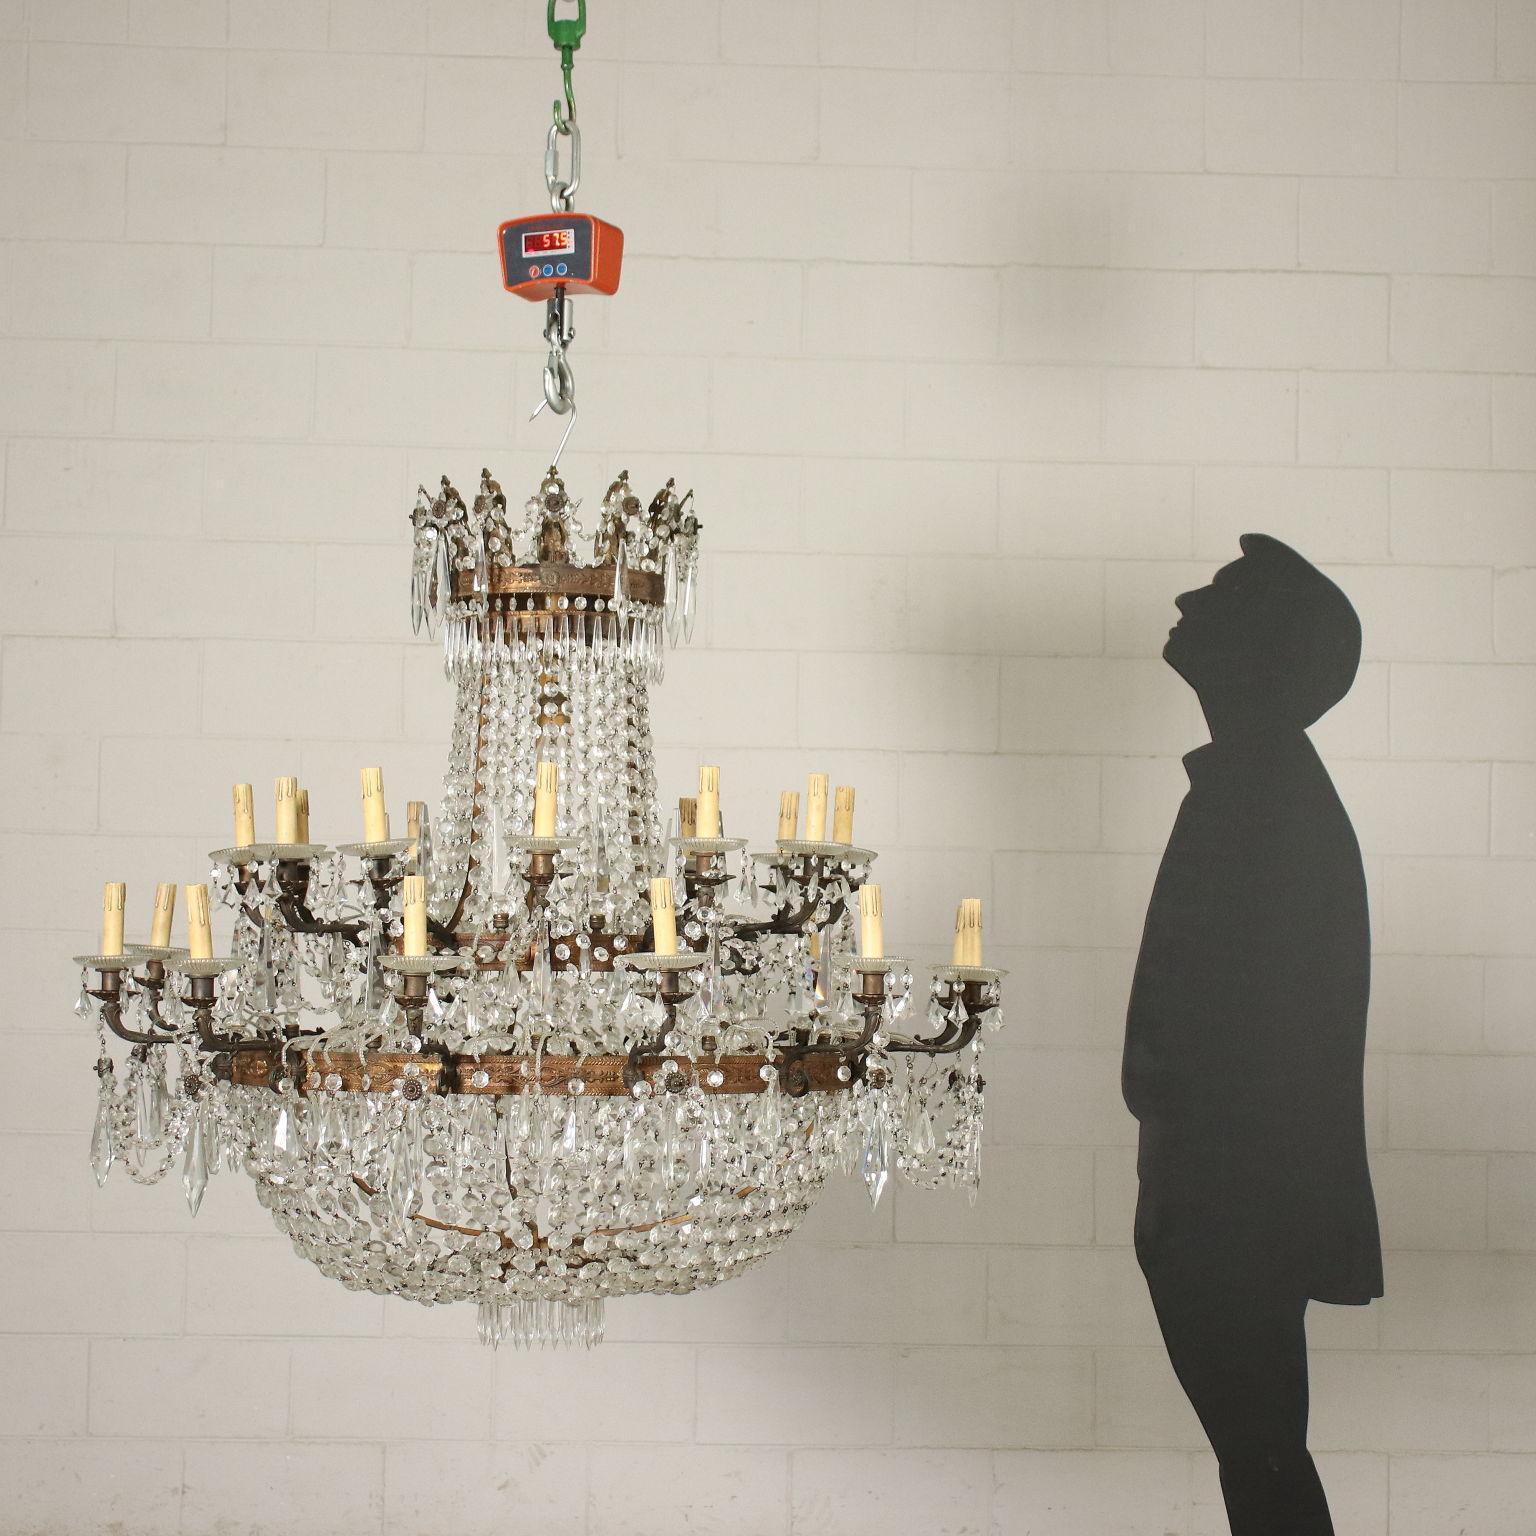 Empire style balloon shaped chandelier, two tiers, twelve lights. In bronze decorated with Empire-style ornamental motifs, it is adorned with glass necklaces and pendants.